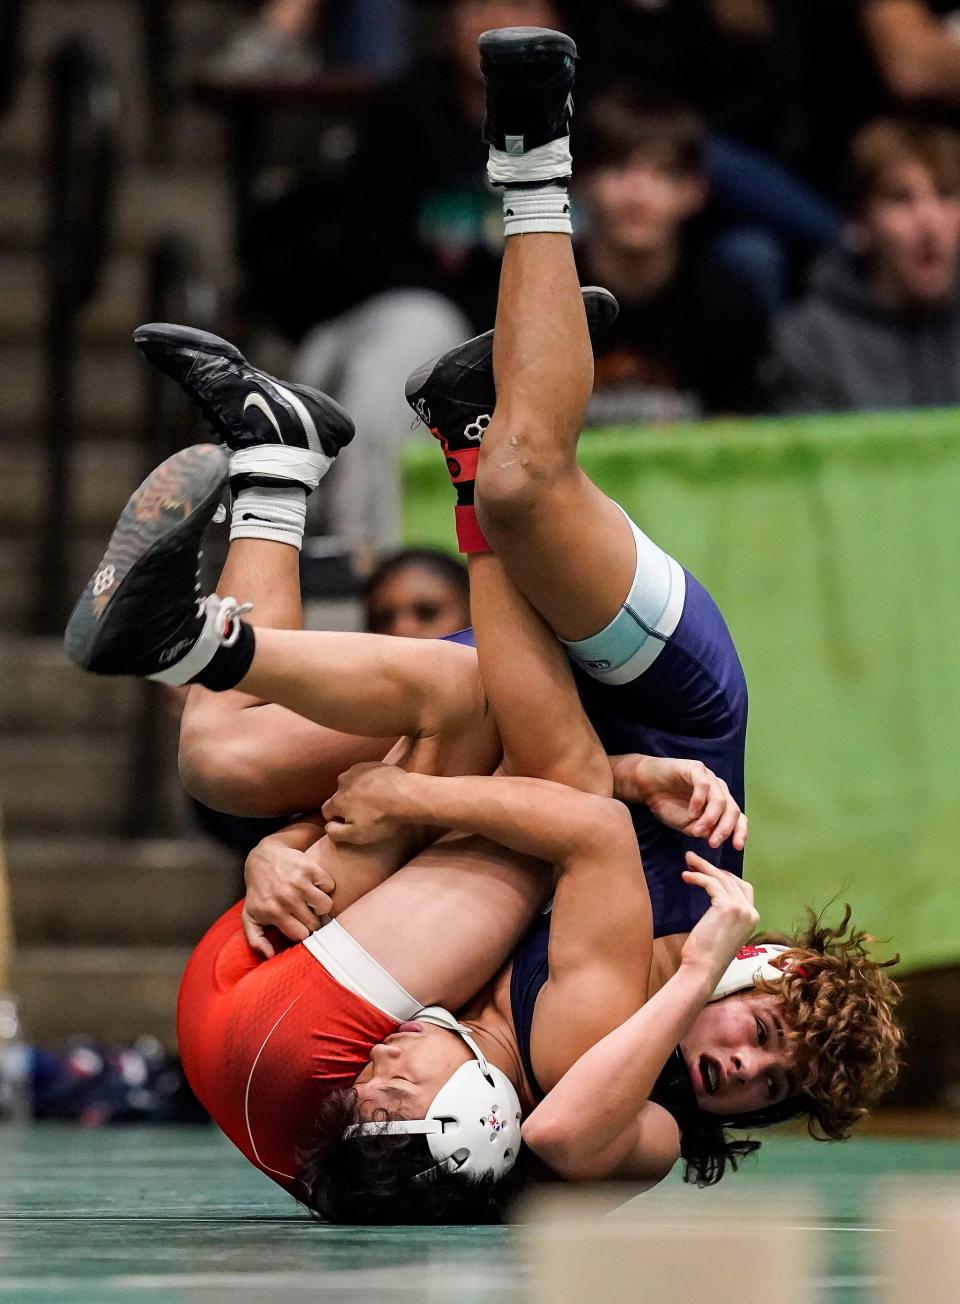 Perry Meridian Hurai Lian wrestles New Palestine Gunner Butt during the IHSAA wrestling semi-state on Saturday, Feb. 11, 2023 at New Castle Fieldhouse in New Castle.